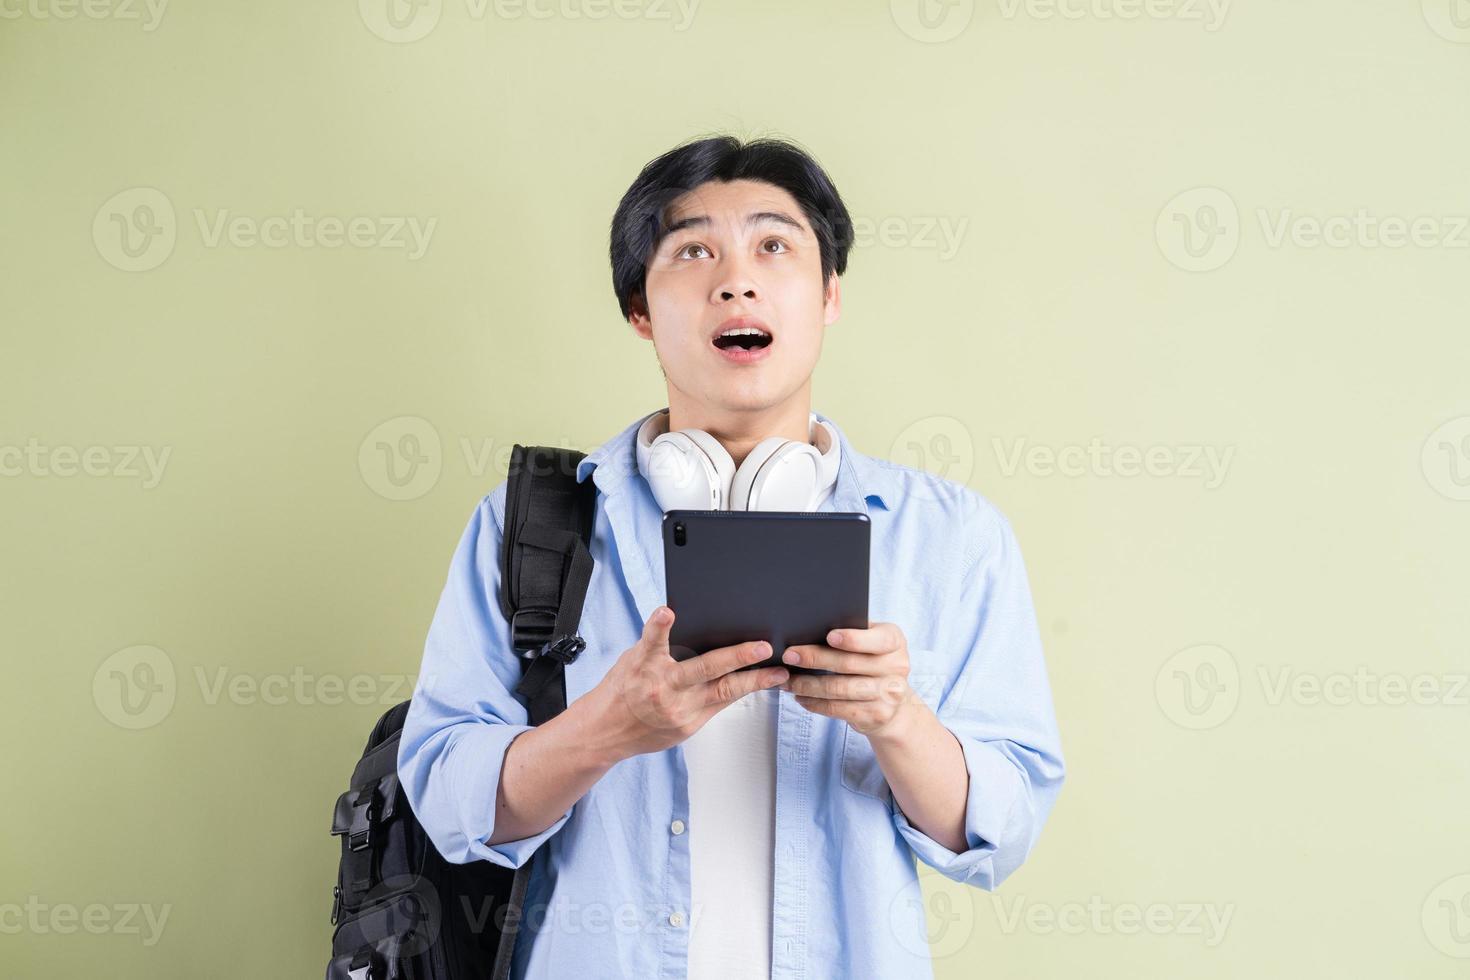 Male Asian student who was using the tablet and looked up with a surprised expression photo